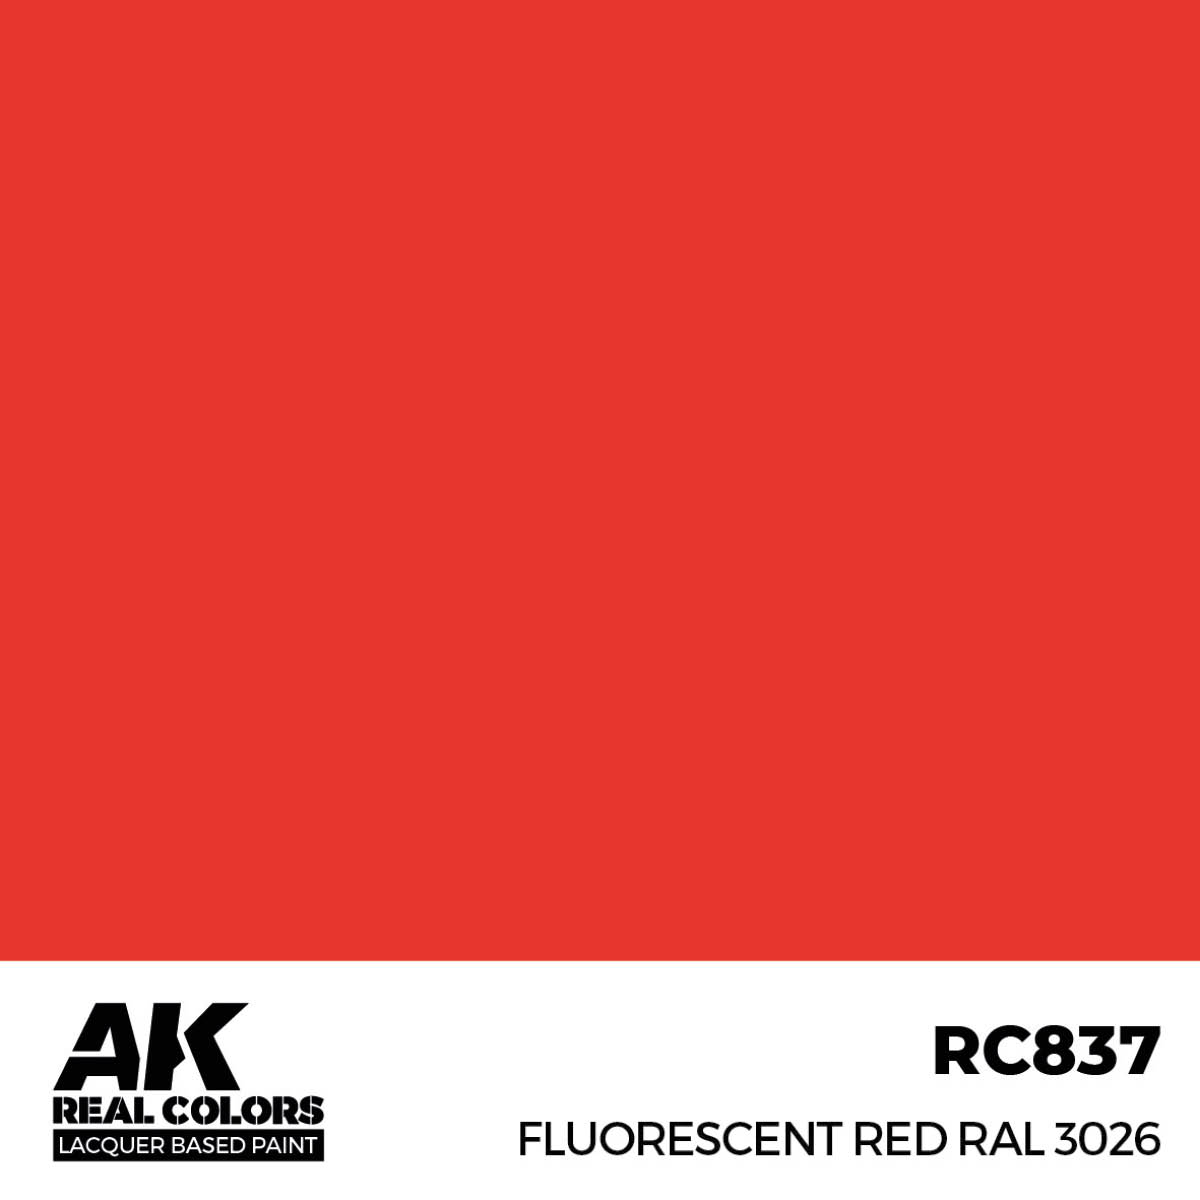 Fluorescent Red RAL 3026